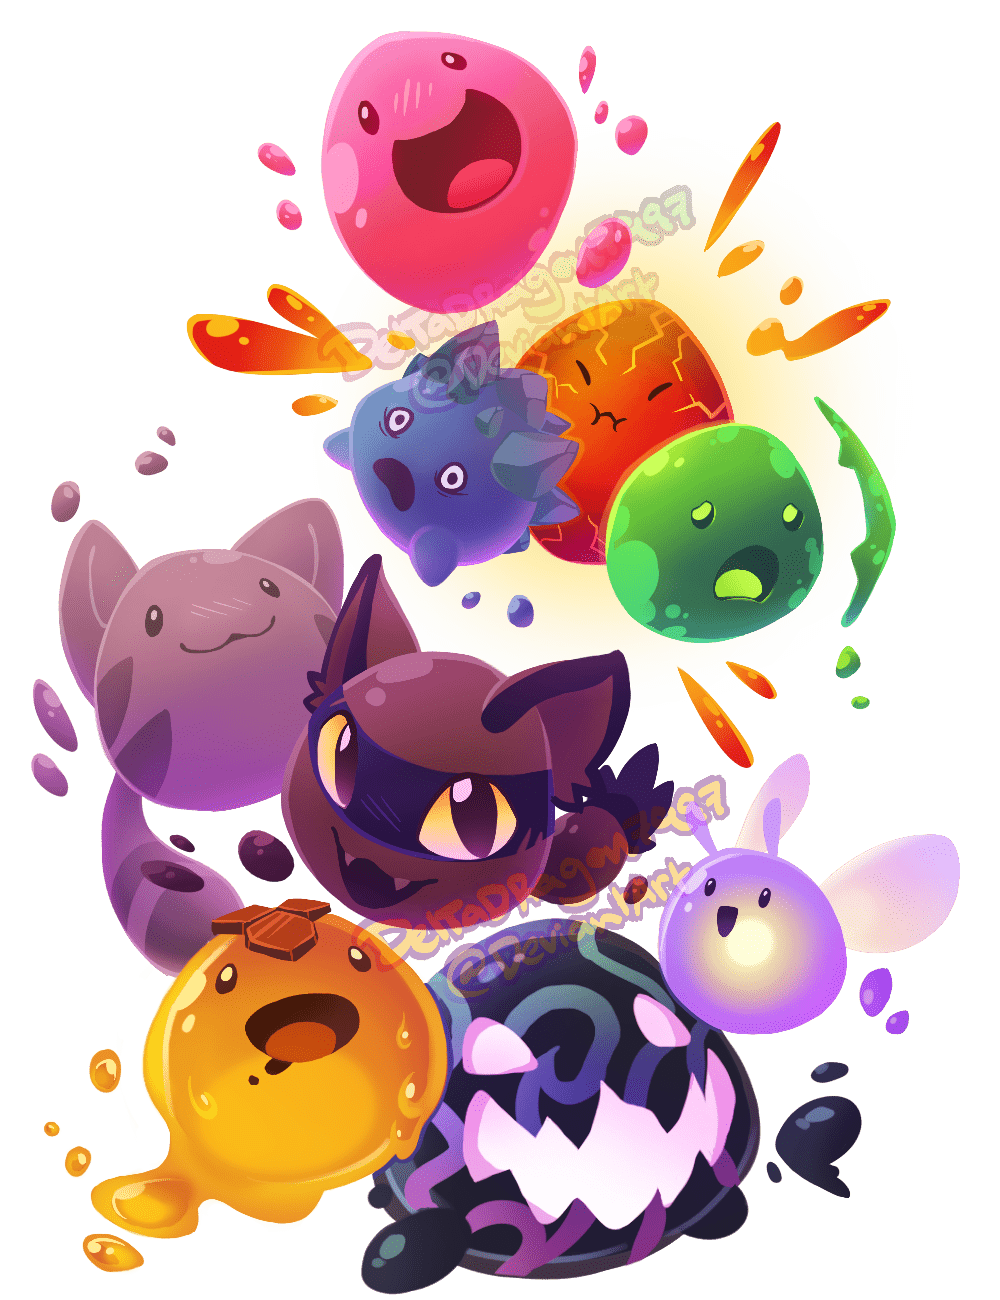 download free slime rancher switch